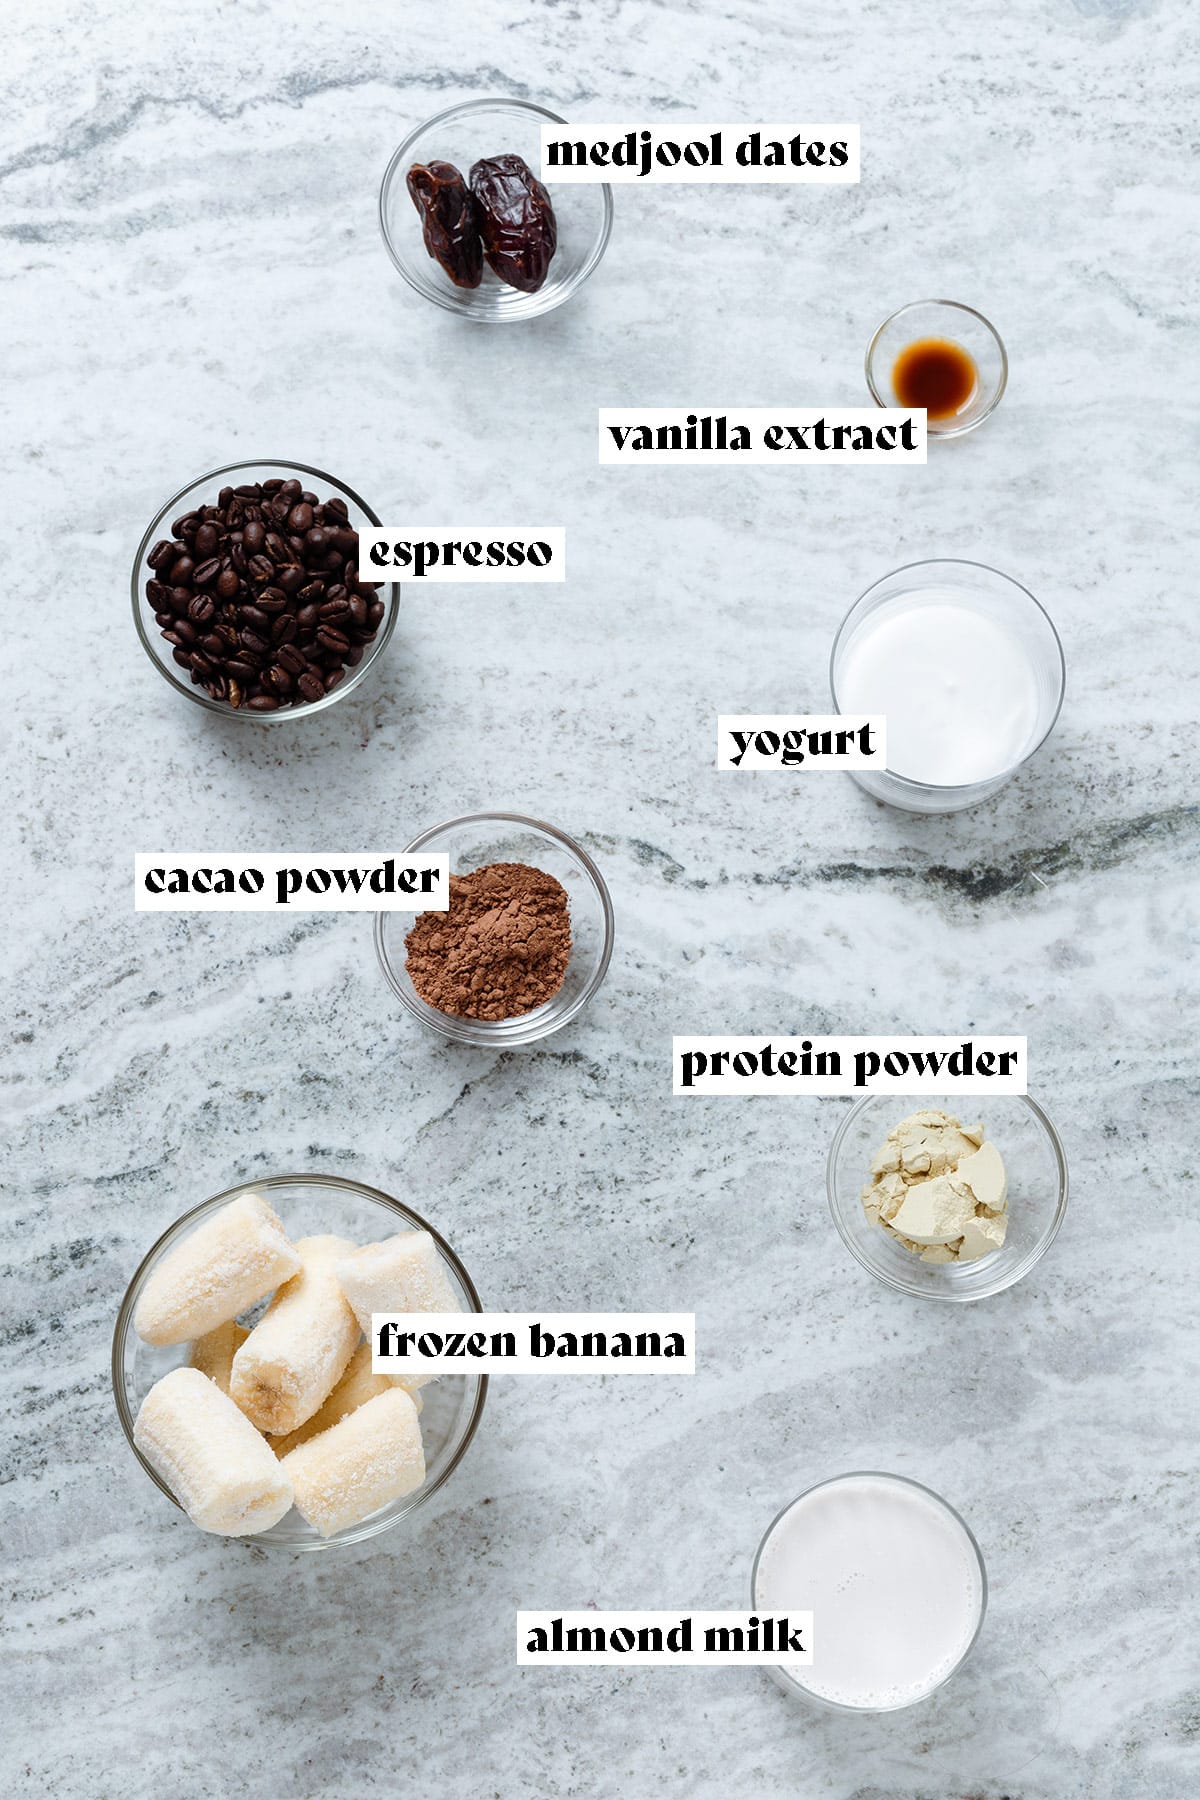 Frozen bananas, cacao, coffee beans, and other mocha smoothie ingredients laid out on a grey stone background with text overlay.